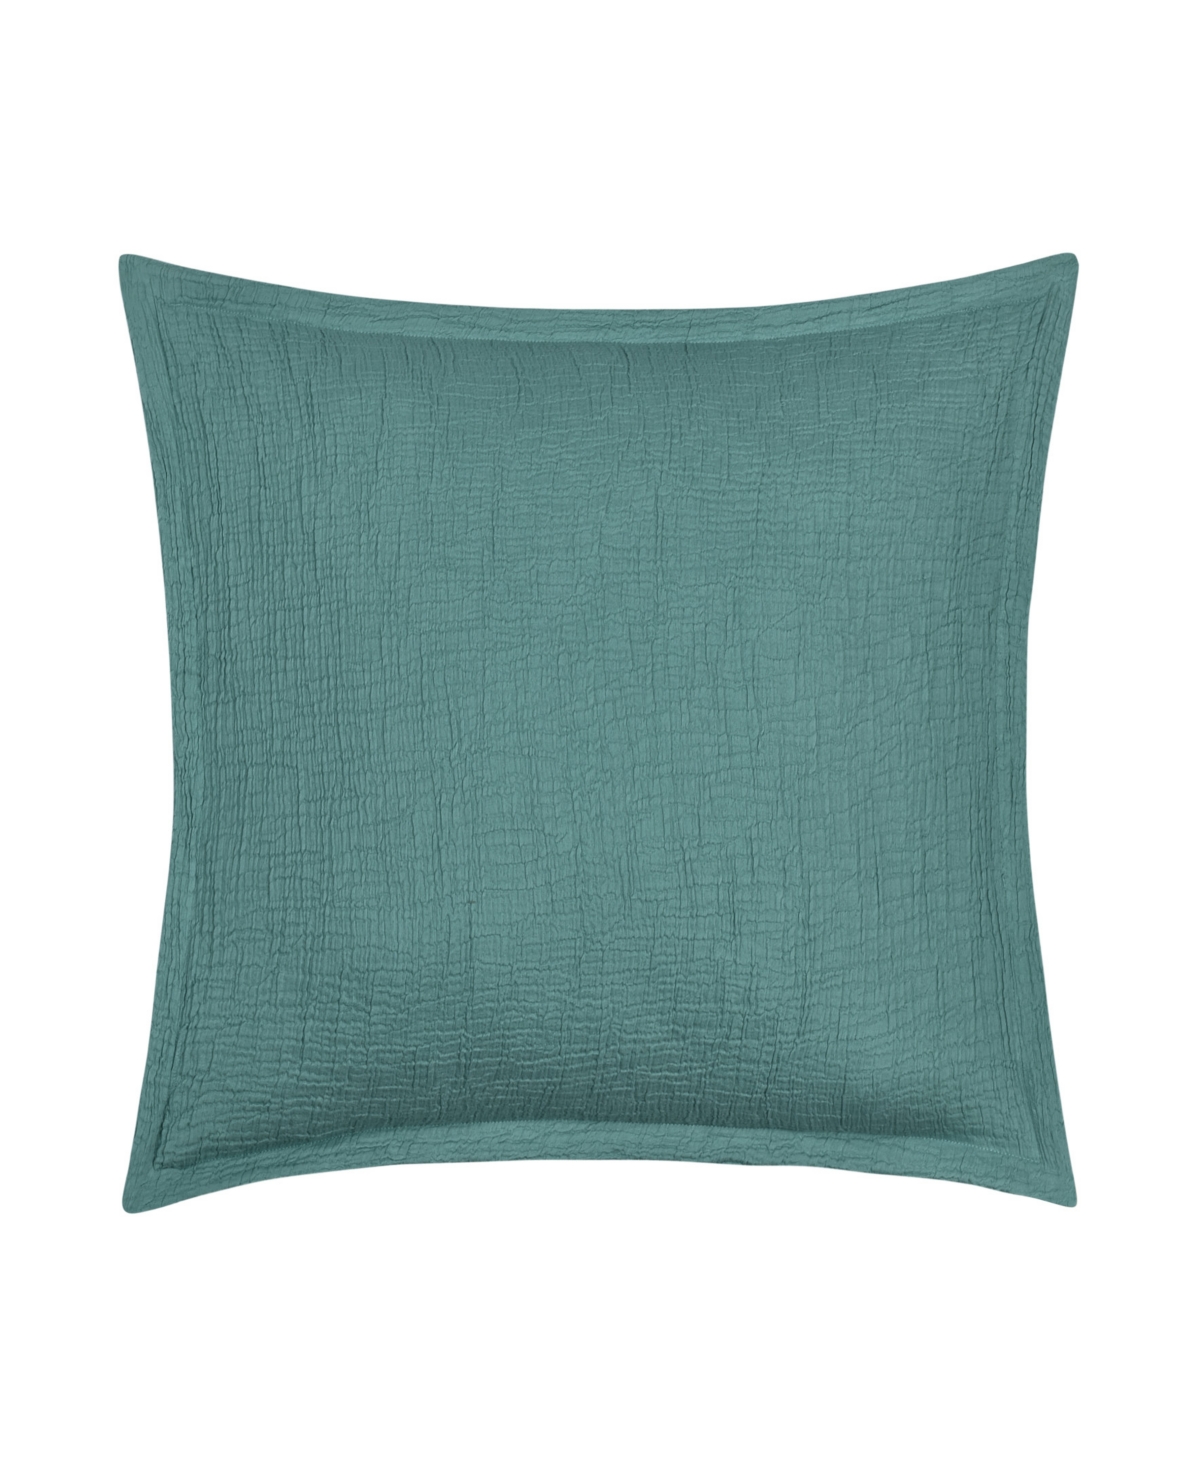 White Sand South Seas Square Decorative Pillow Cover, 20" X 20" In Teal